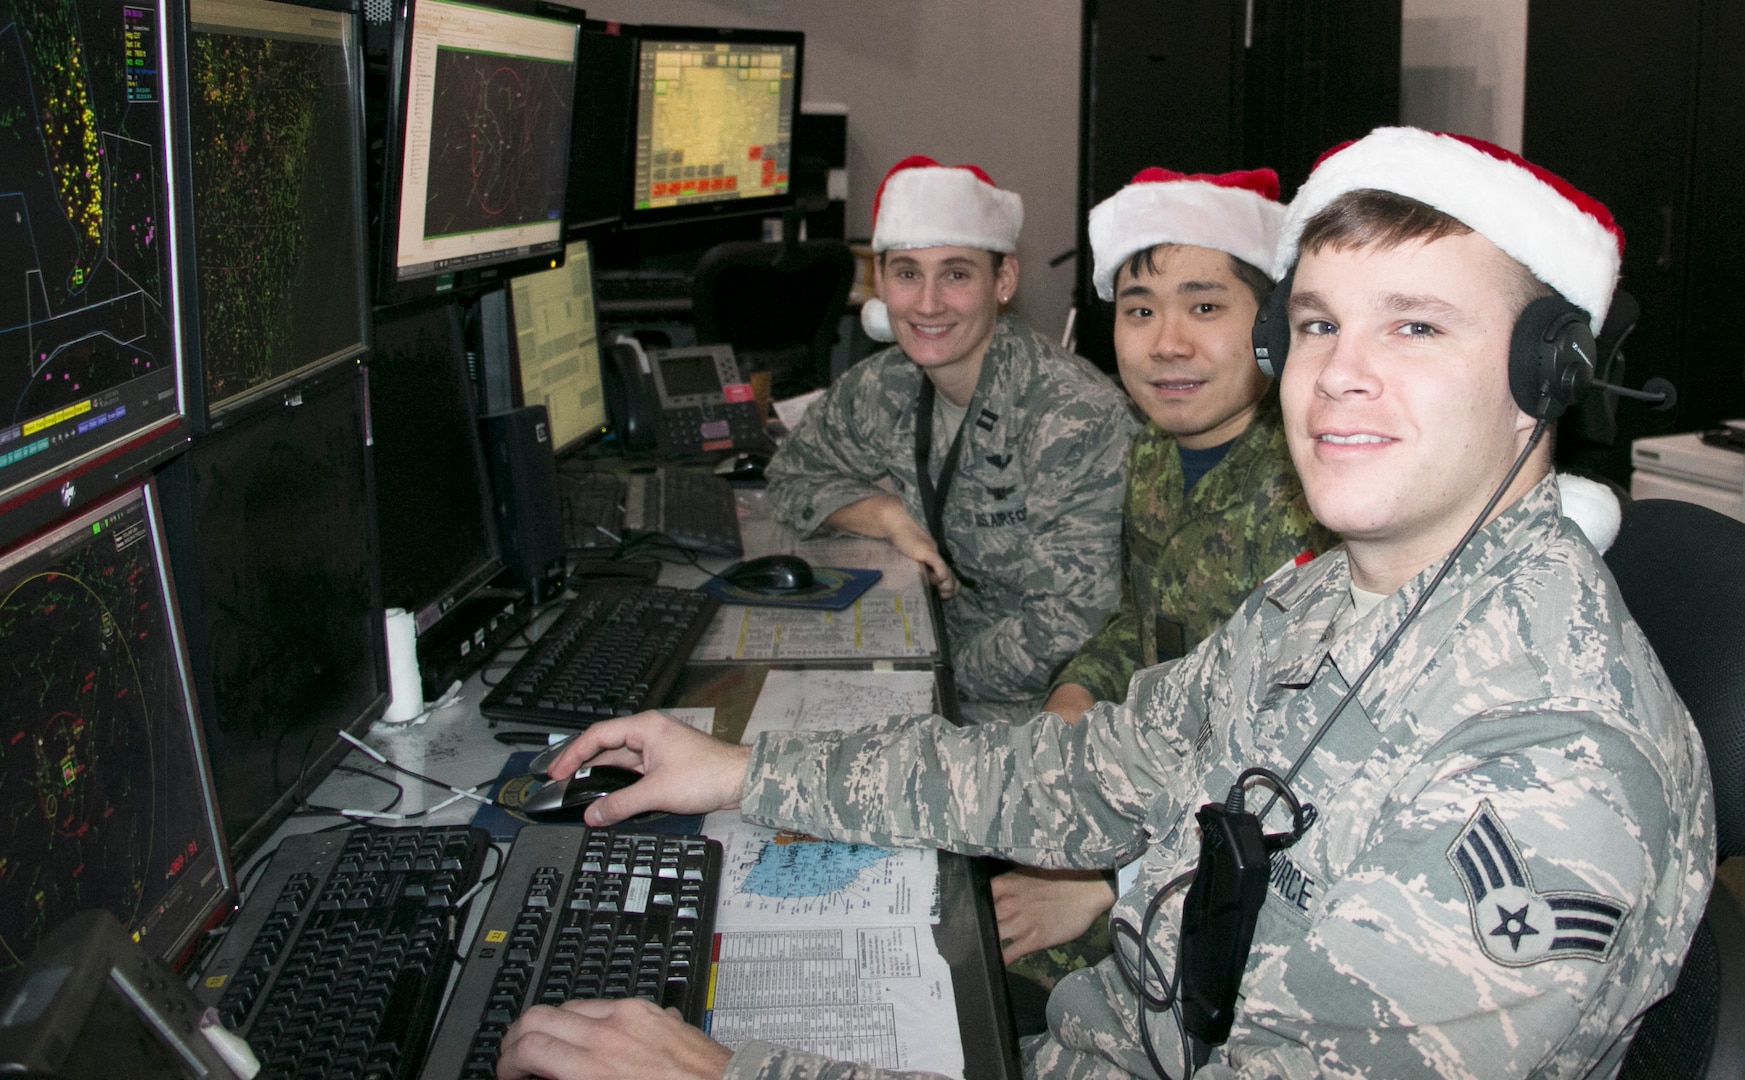 Airmen at the Eastern Air Defense Sector (EADS) train in preparation for Santa’s Christmas Eve flight at EADS headquarters in Rome, N.Y., Dec. 17, 2019. Pictured are, from right,  Senior Airman Timothy Destito of the New York Air National Guard; Capt. John Byeon, Royal Canadian Air Force, and Capt. Sarah Atherton, New York Air National Guard. Atherton and Destito are members of the 224th Air Defense Squadron and  Byeon is a member of the Canadian Detachment at EADS.